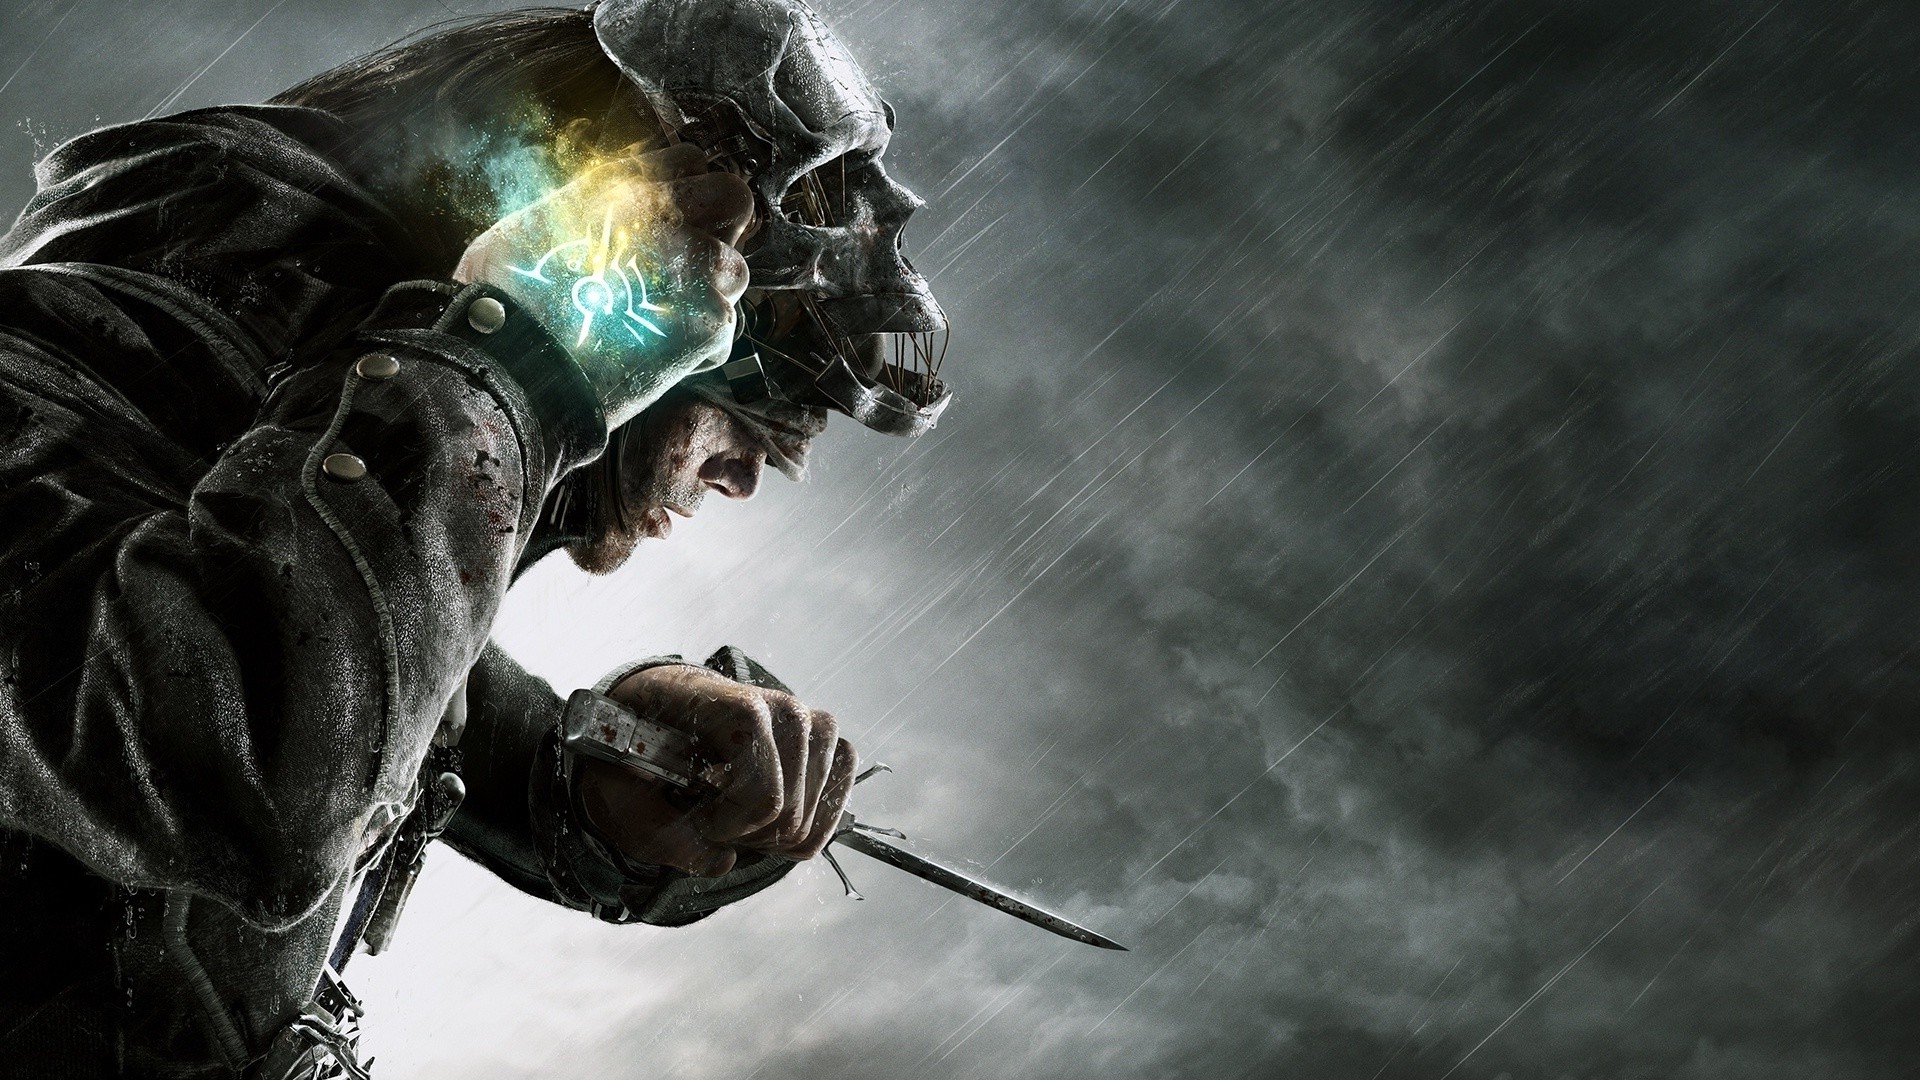 80+ Dishonored HD Wallpapers and Backgrounds